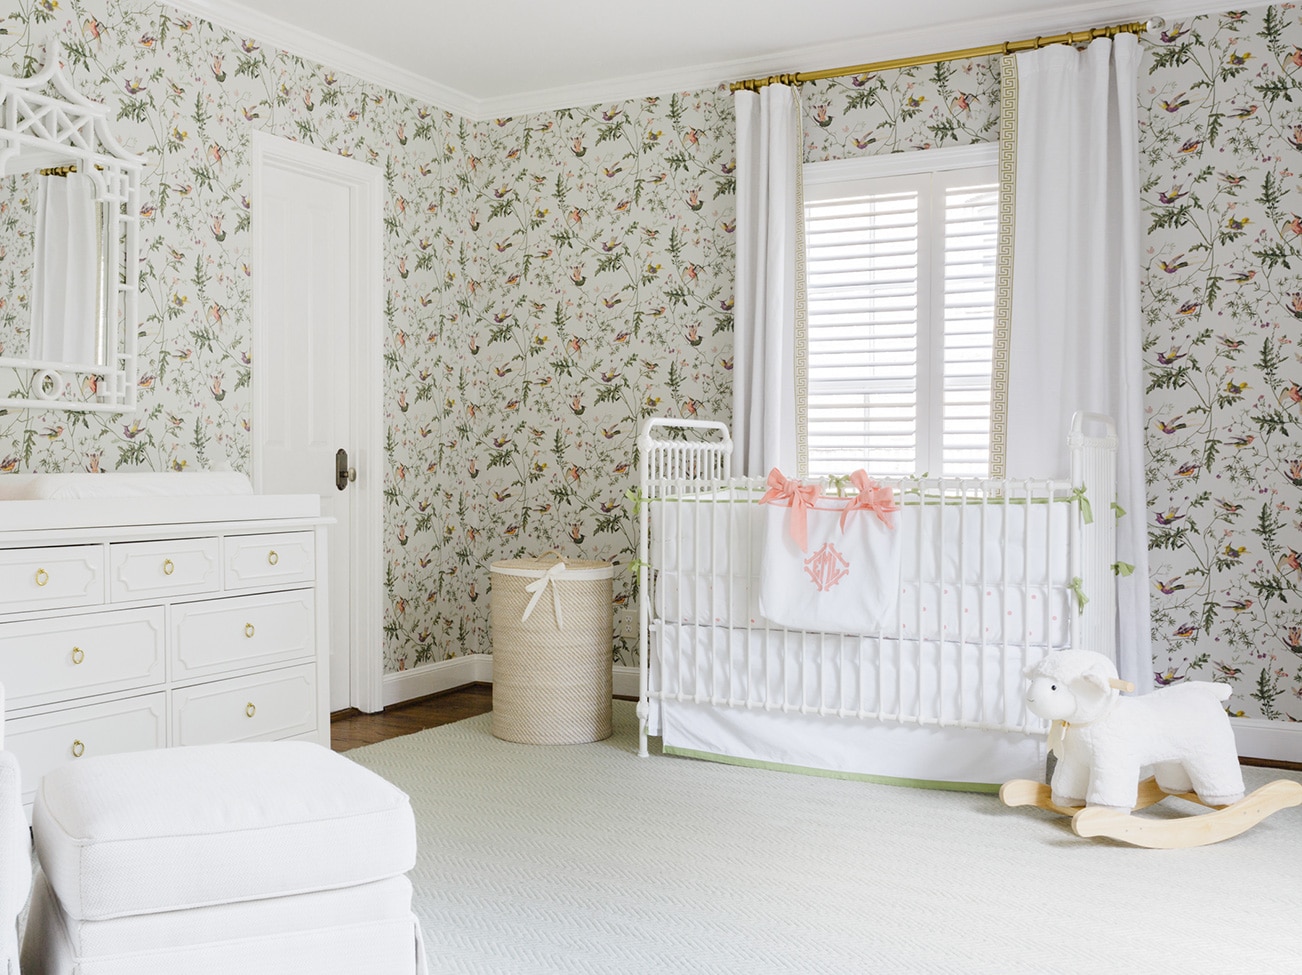 Cheery floral-papered nursery with floor-to-ceiling white drapes, white crib, dresser, chair, and white plush baby rocker.